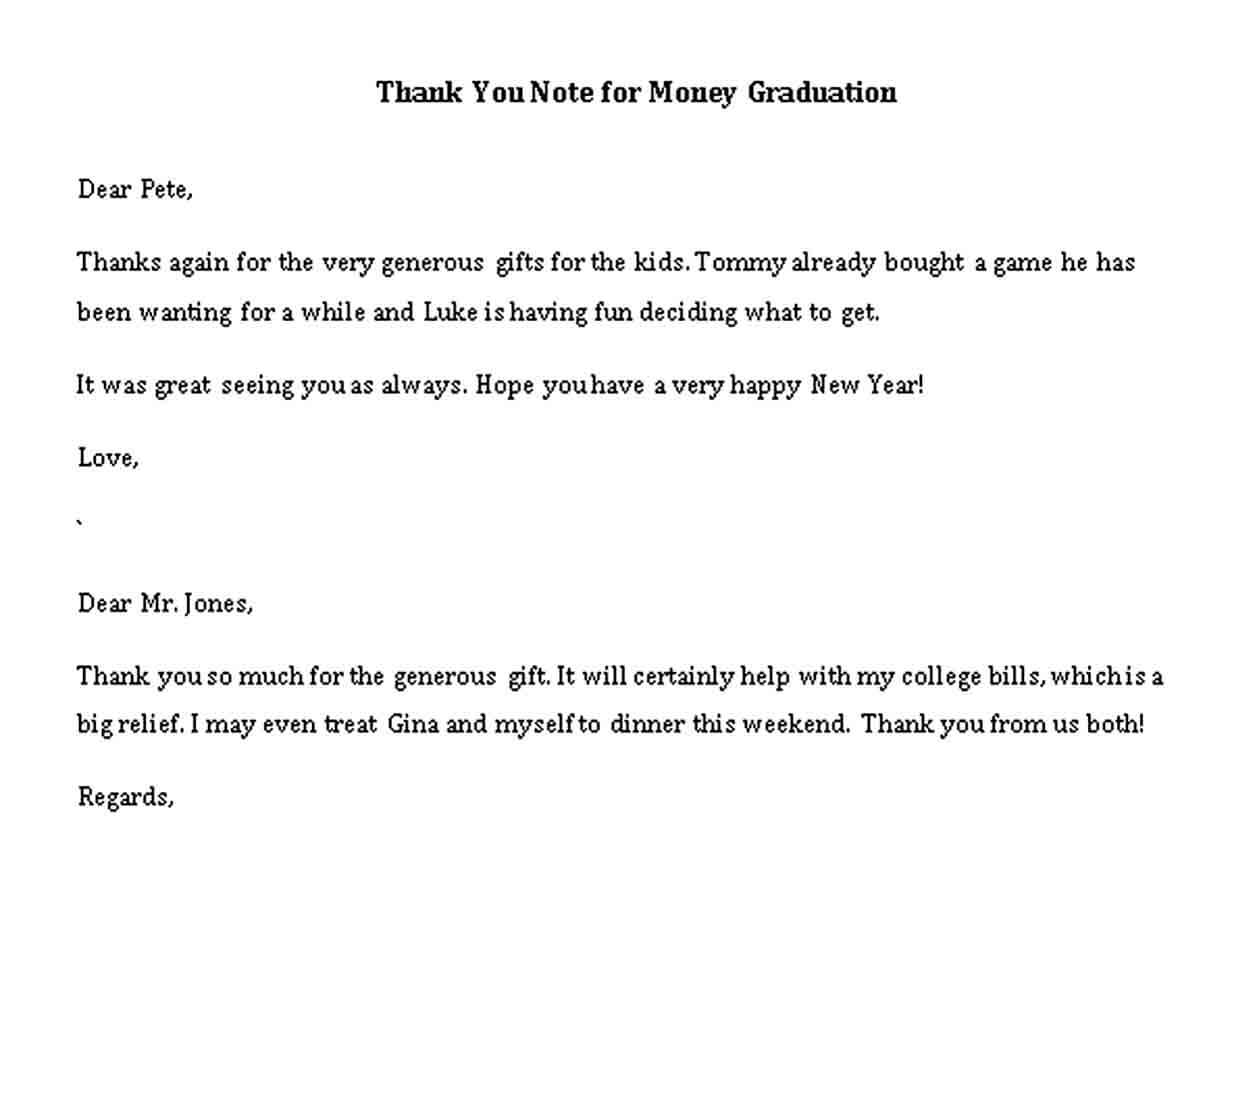 thank you note for money graduation